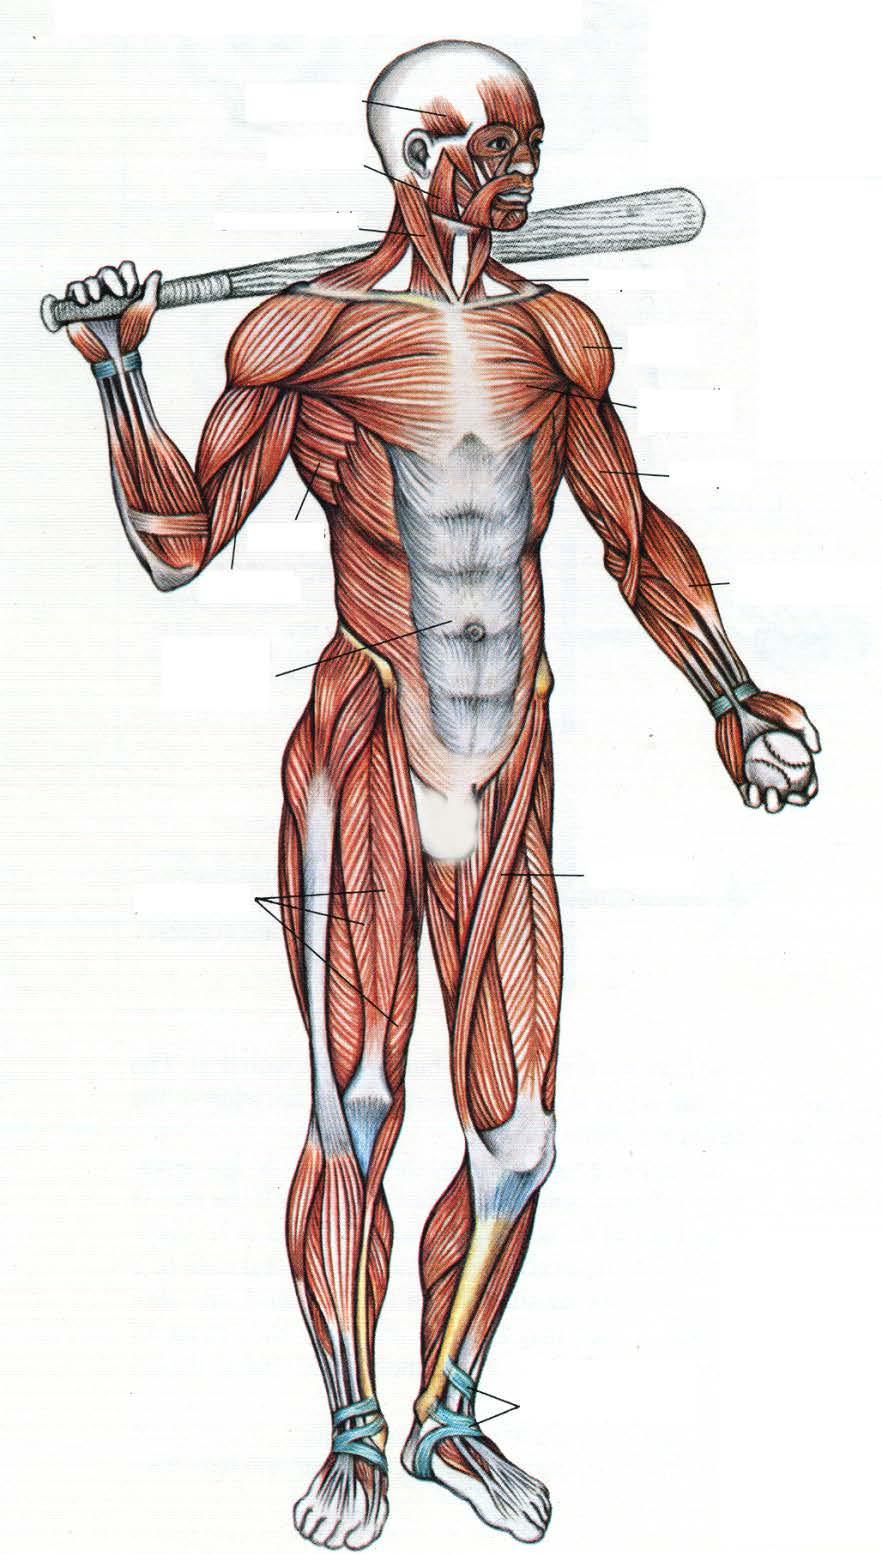 Muscular System Tour Lab page 4 The Muscles a front view The Muscles a back view A Identify: place the letter next to the name.